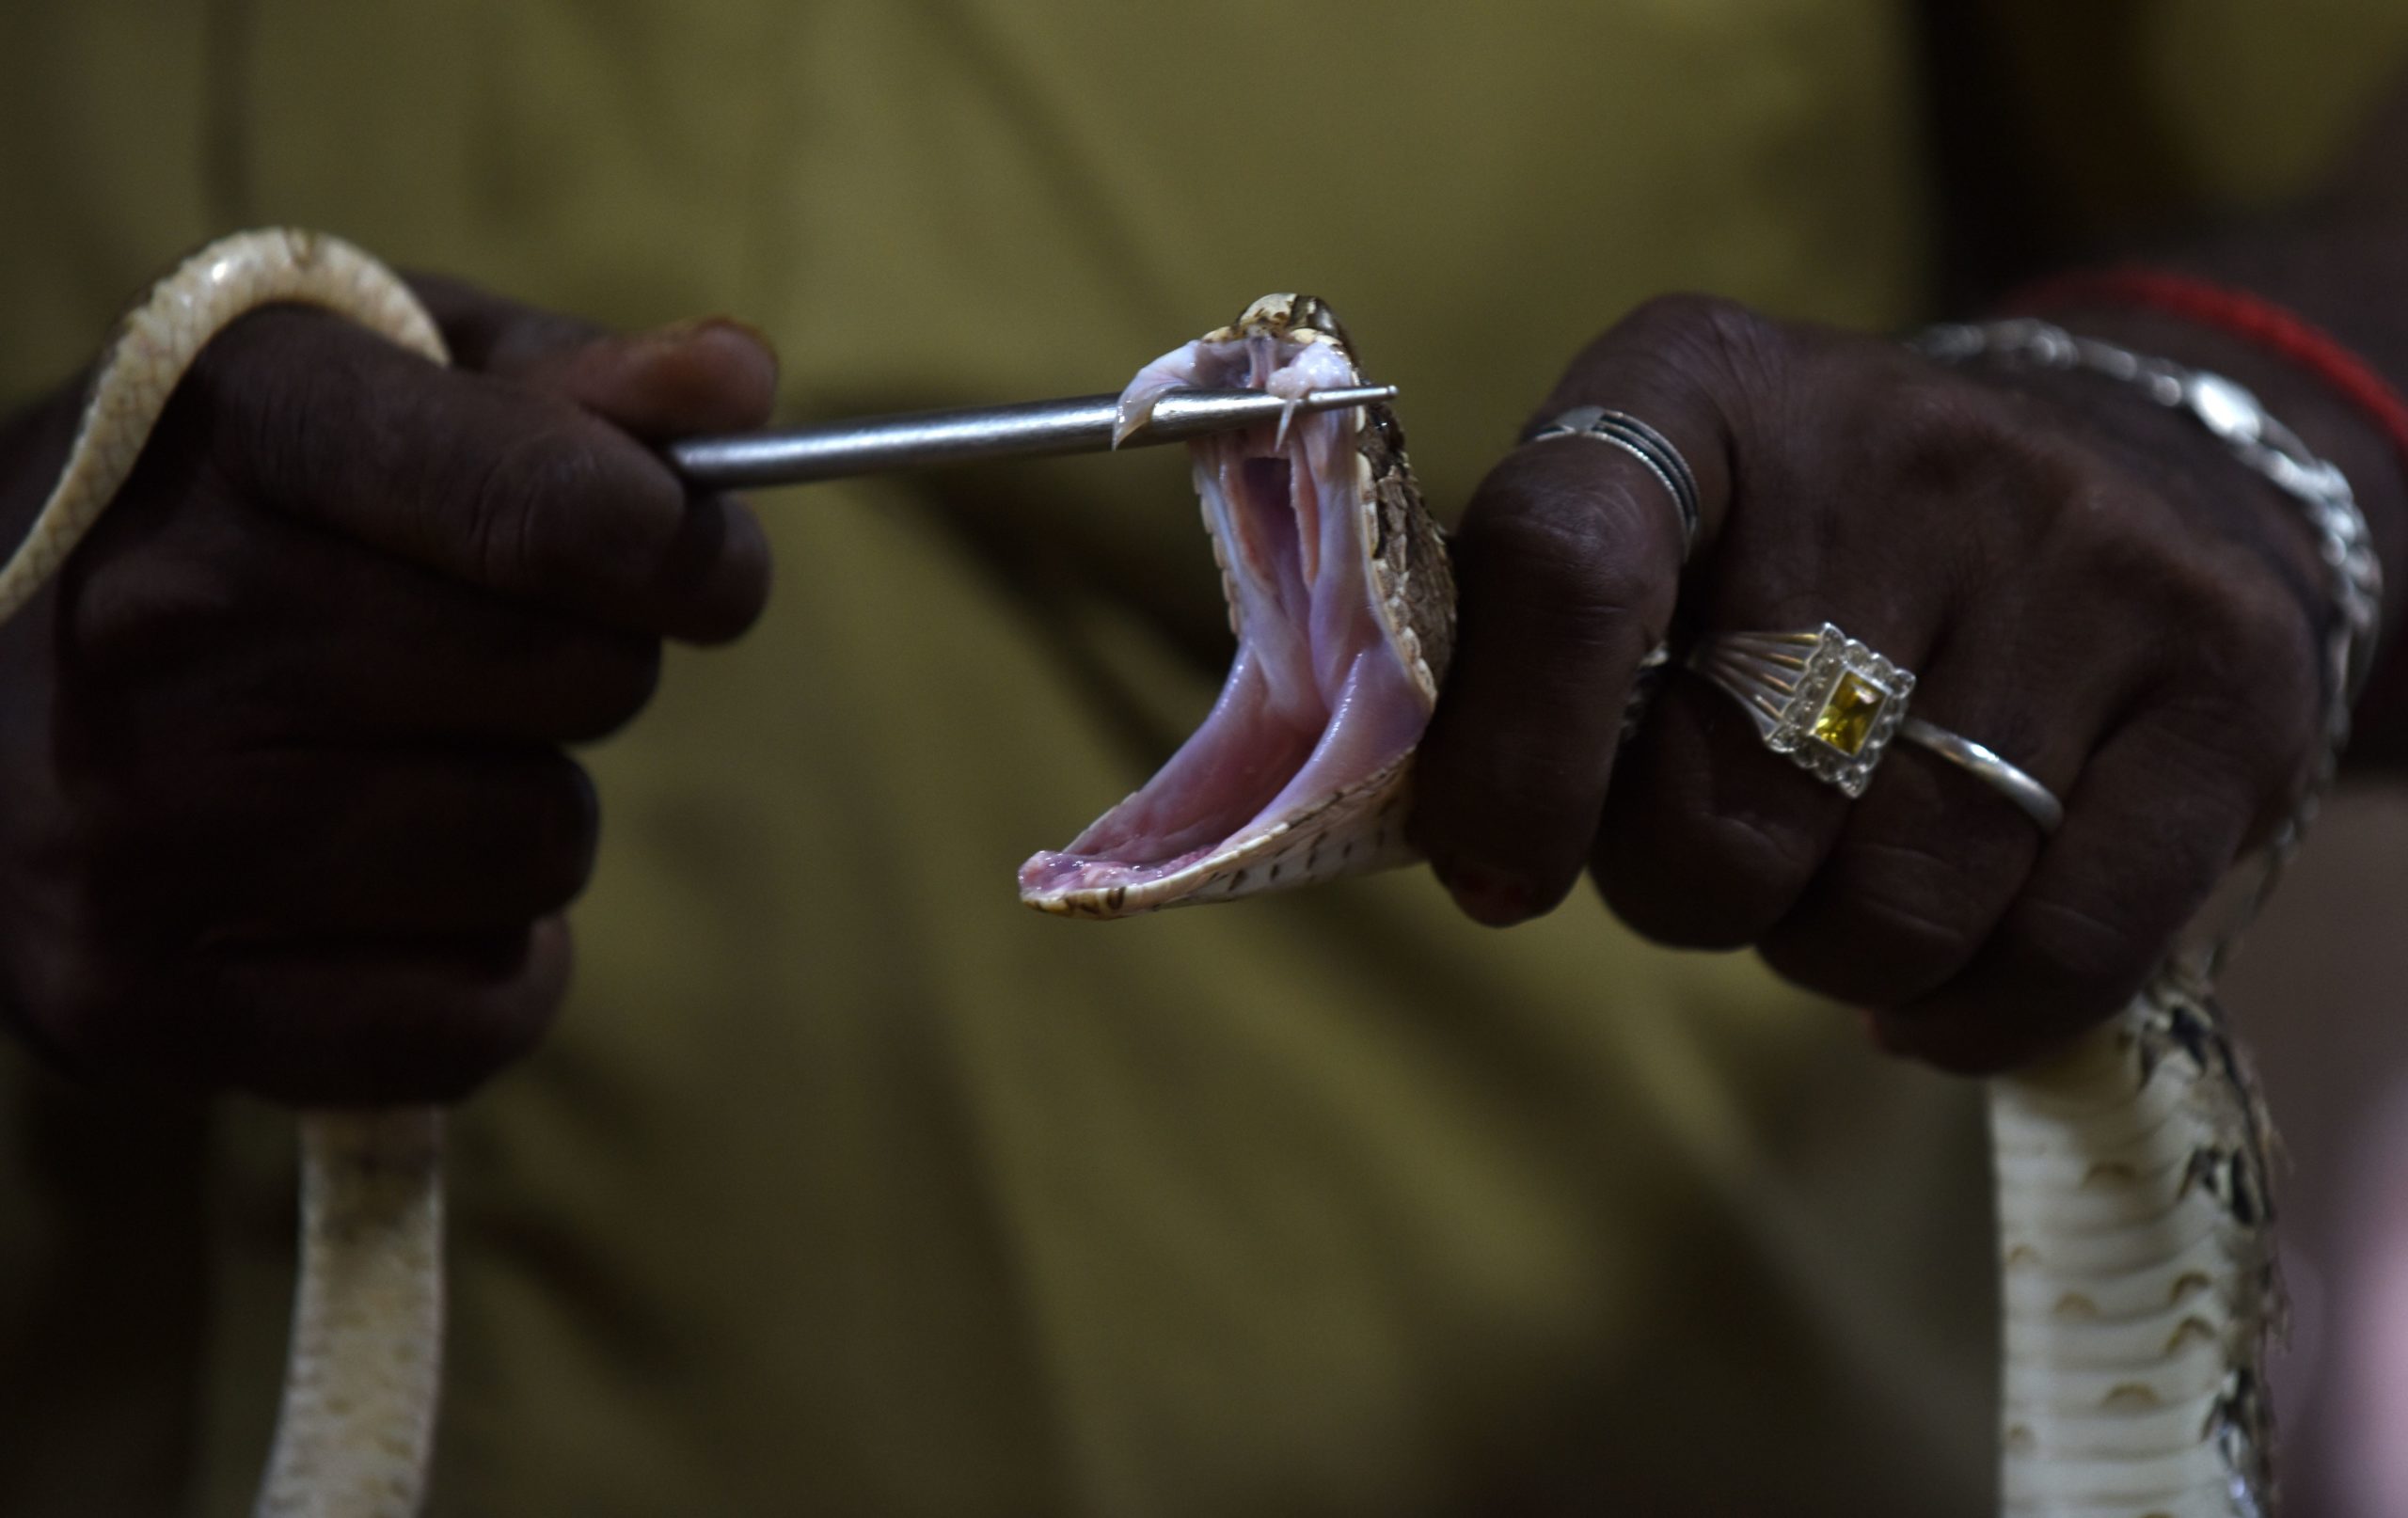 A Russel viper at a venom extraction centre in India in 2016. (Photo: ARUN SANKAR/AFP, Getty Images)